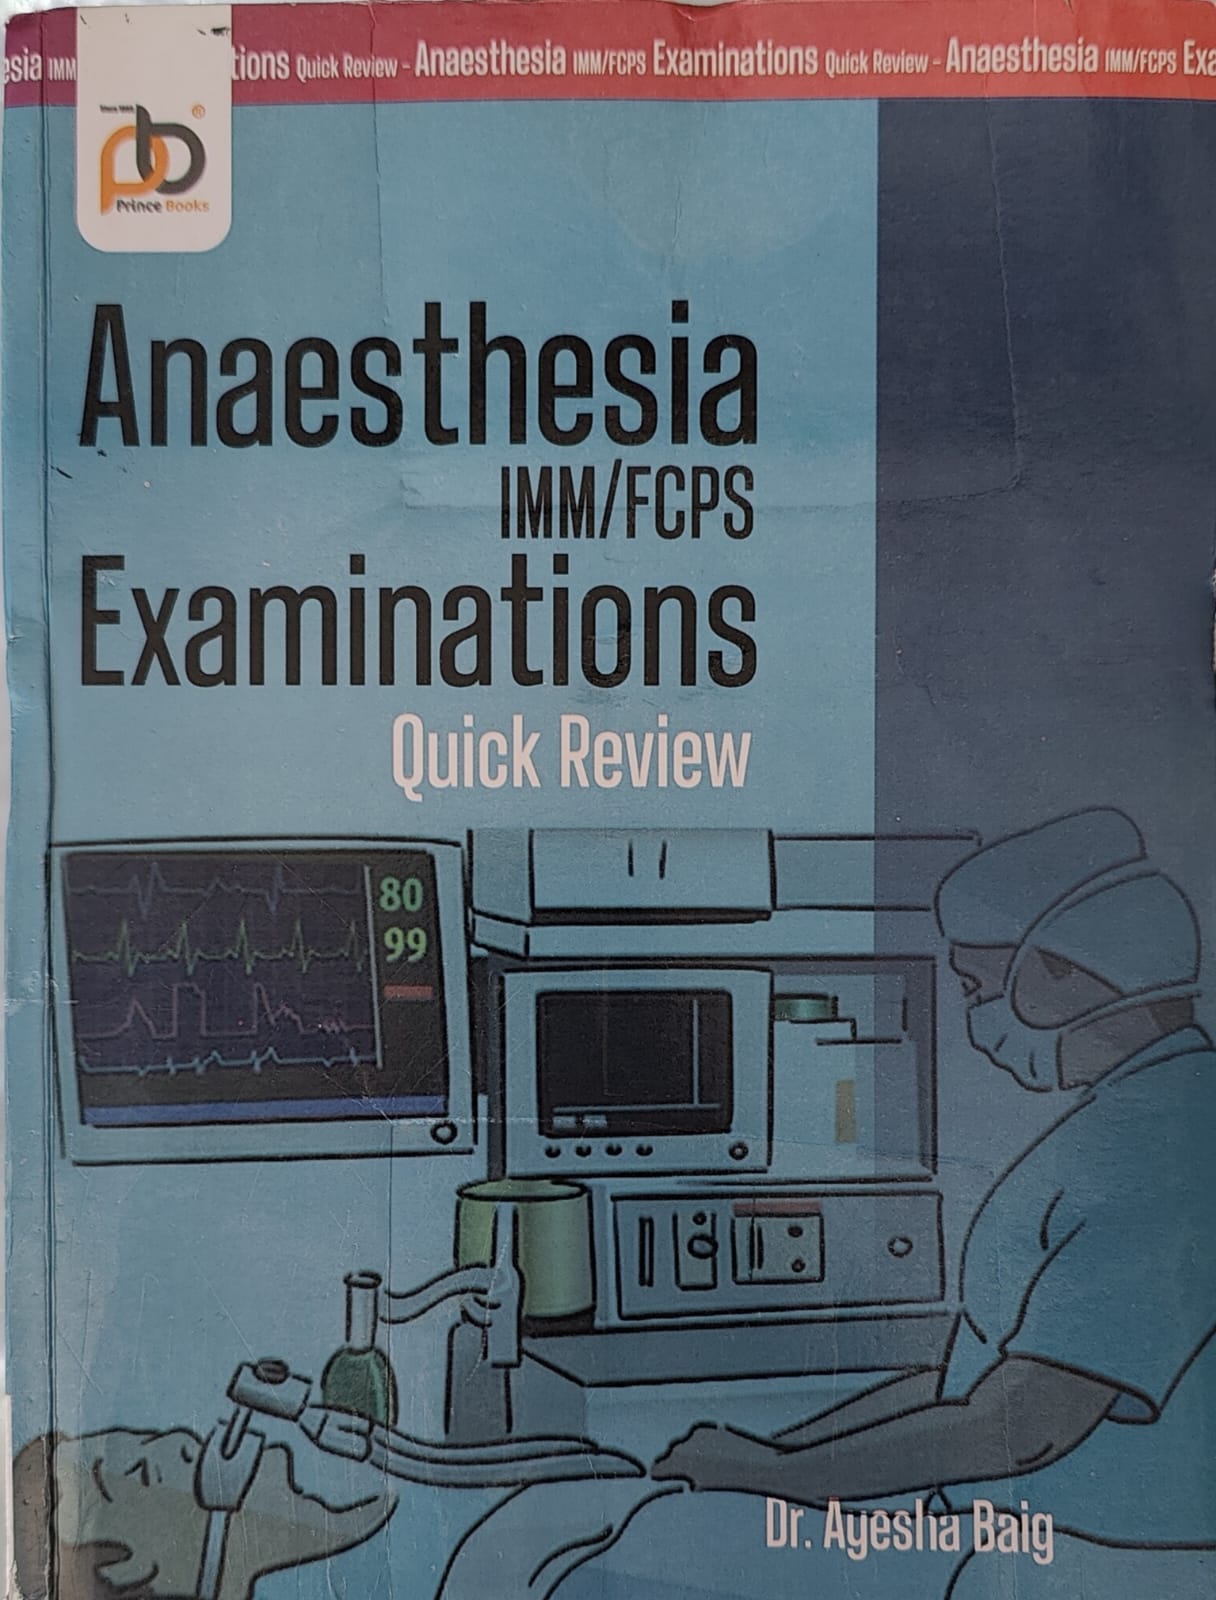 Anaesthesia IMM/FCPS Examinations Quick Review